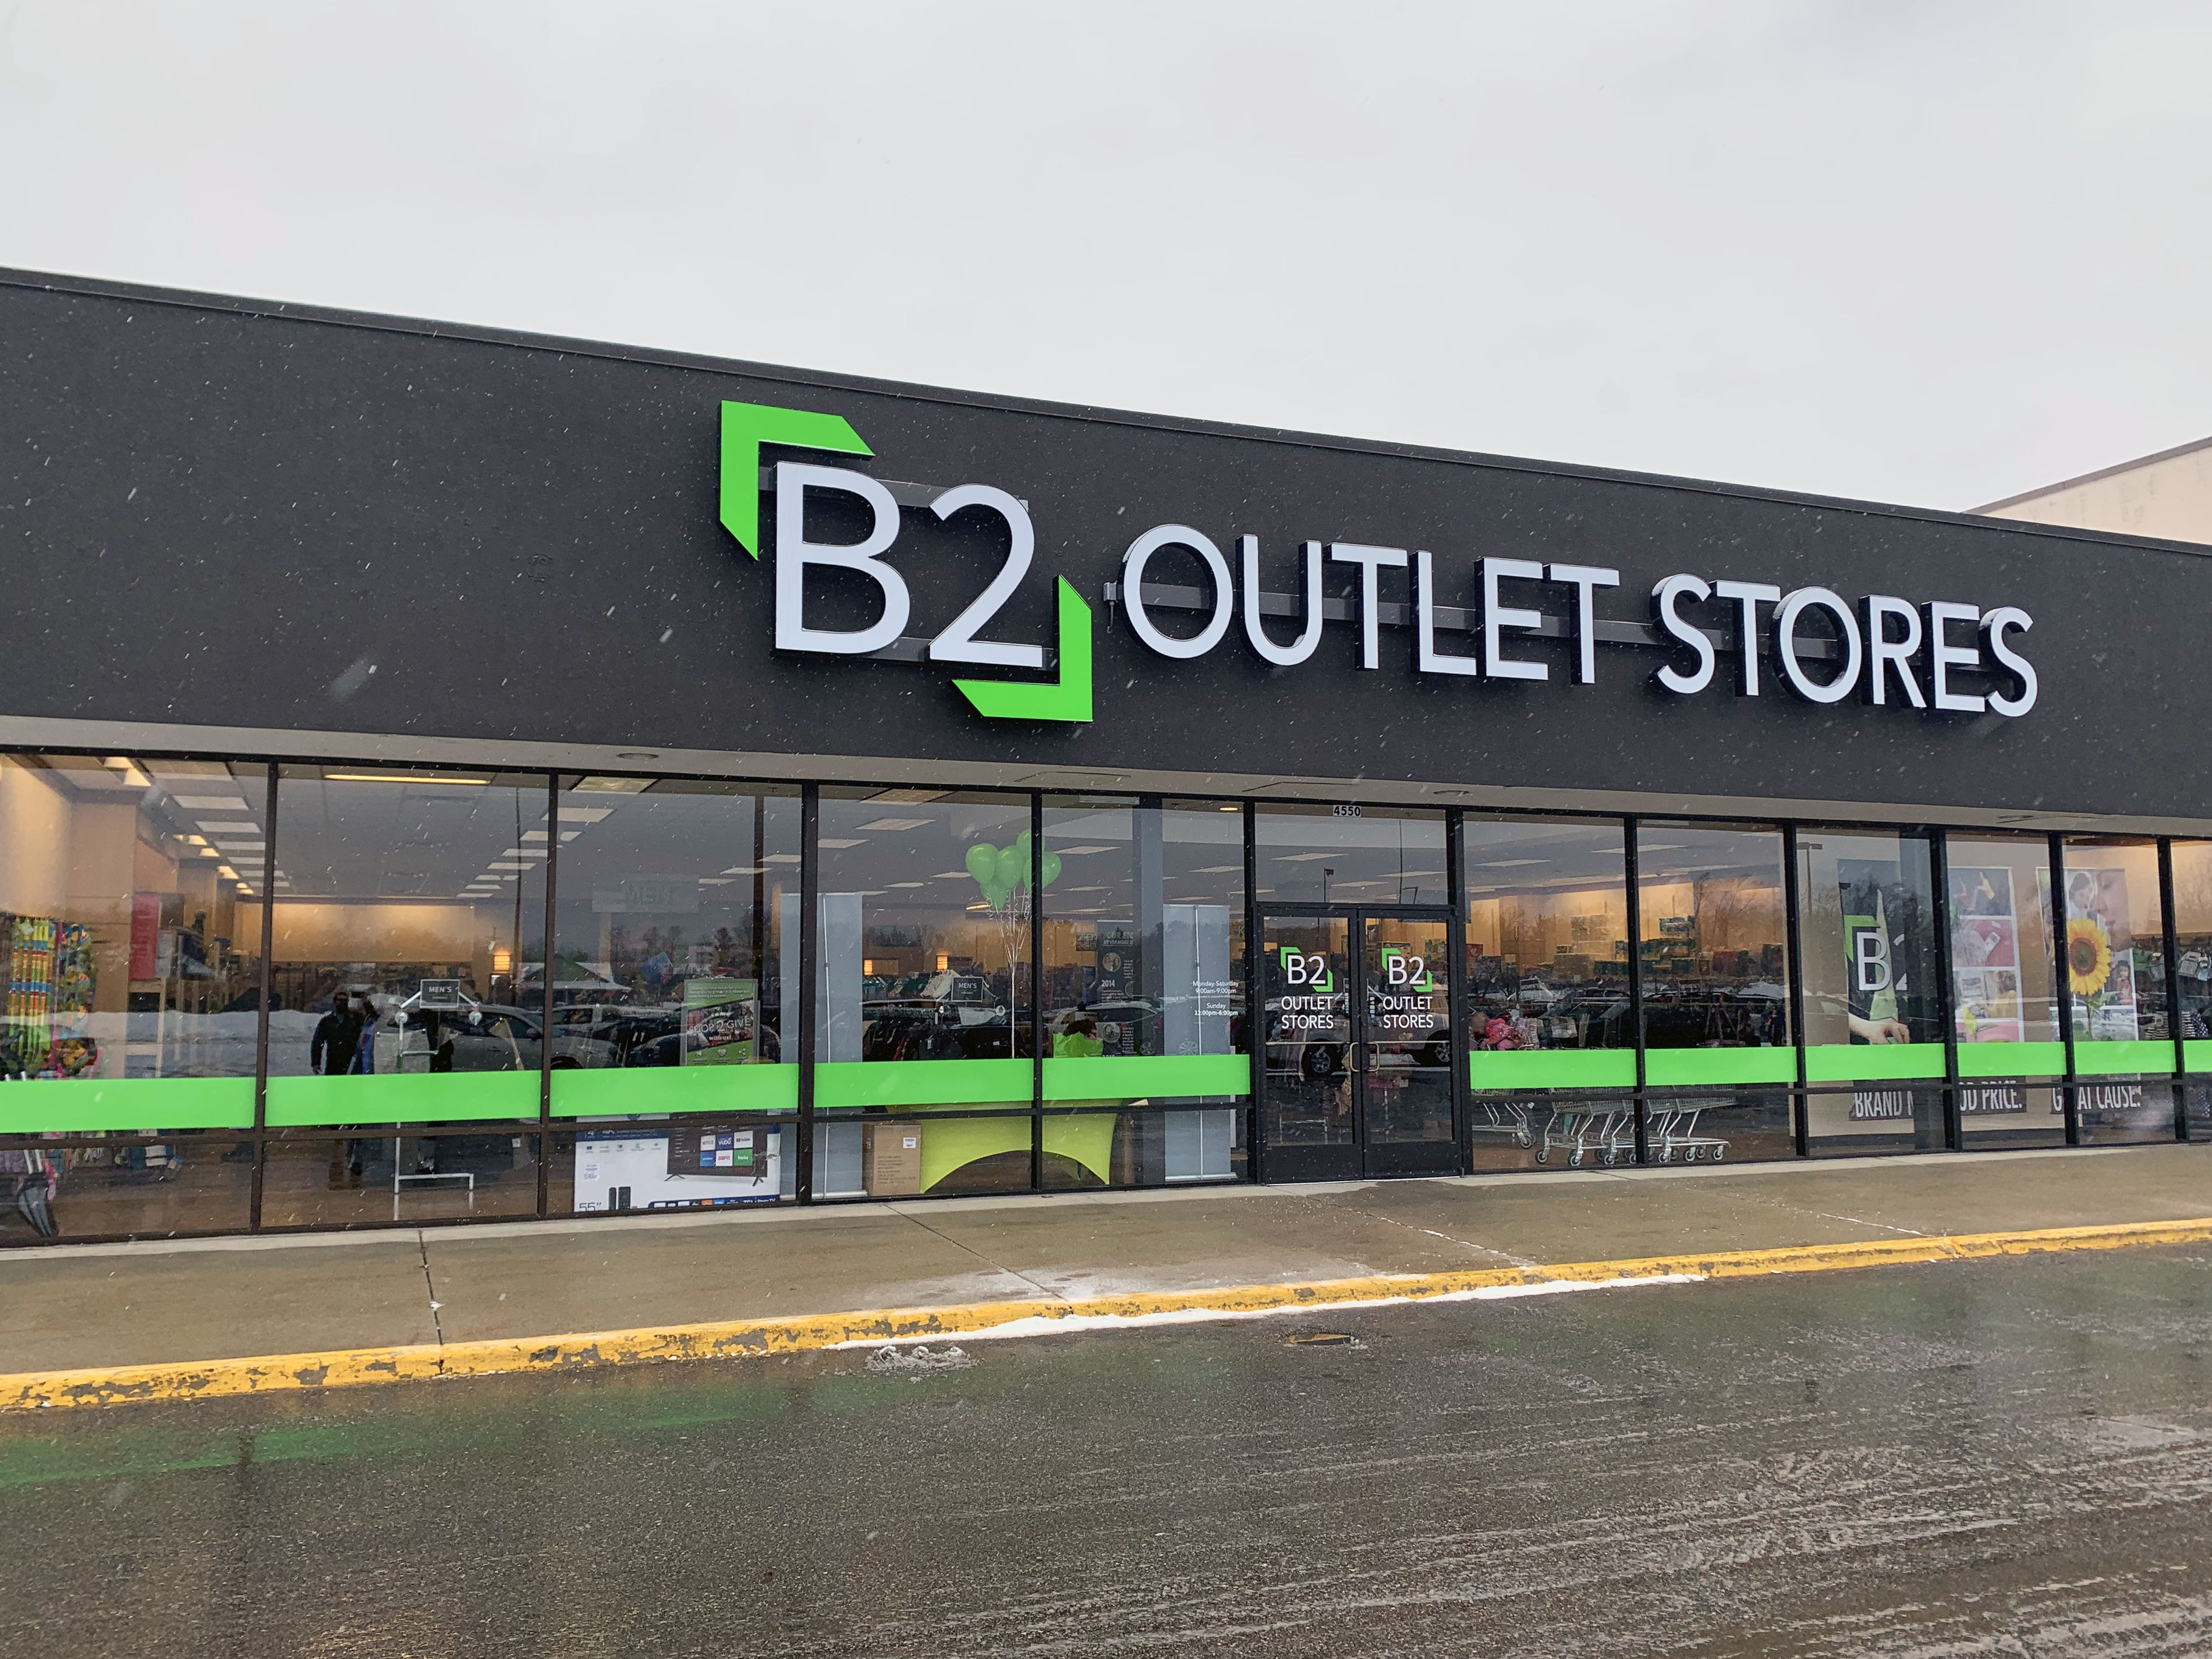 West Lansing's B2 Outlet is Officially Open